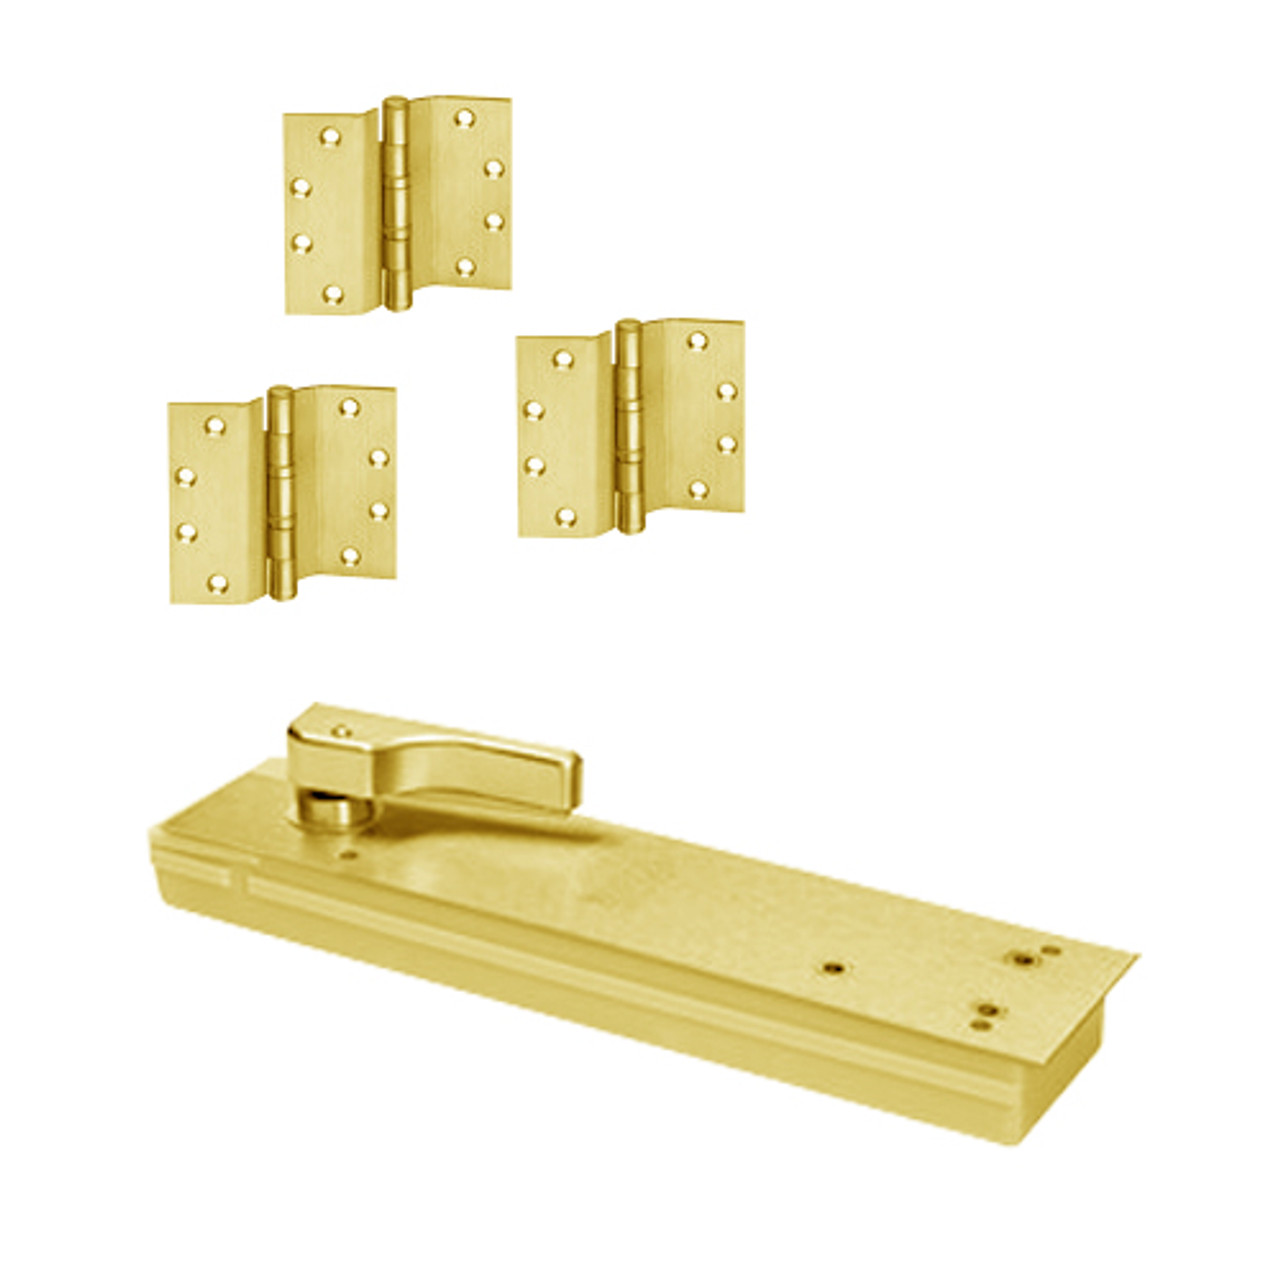 HM5104NBC-LH-605 Rixson HM51 Series 3/4" Offset Hung Shallow Depth Floor Closers in Bright Brass Finish